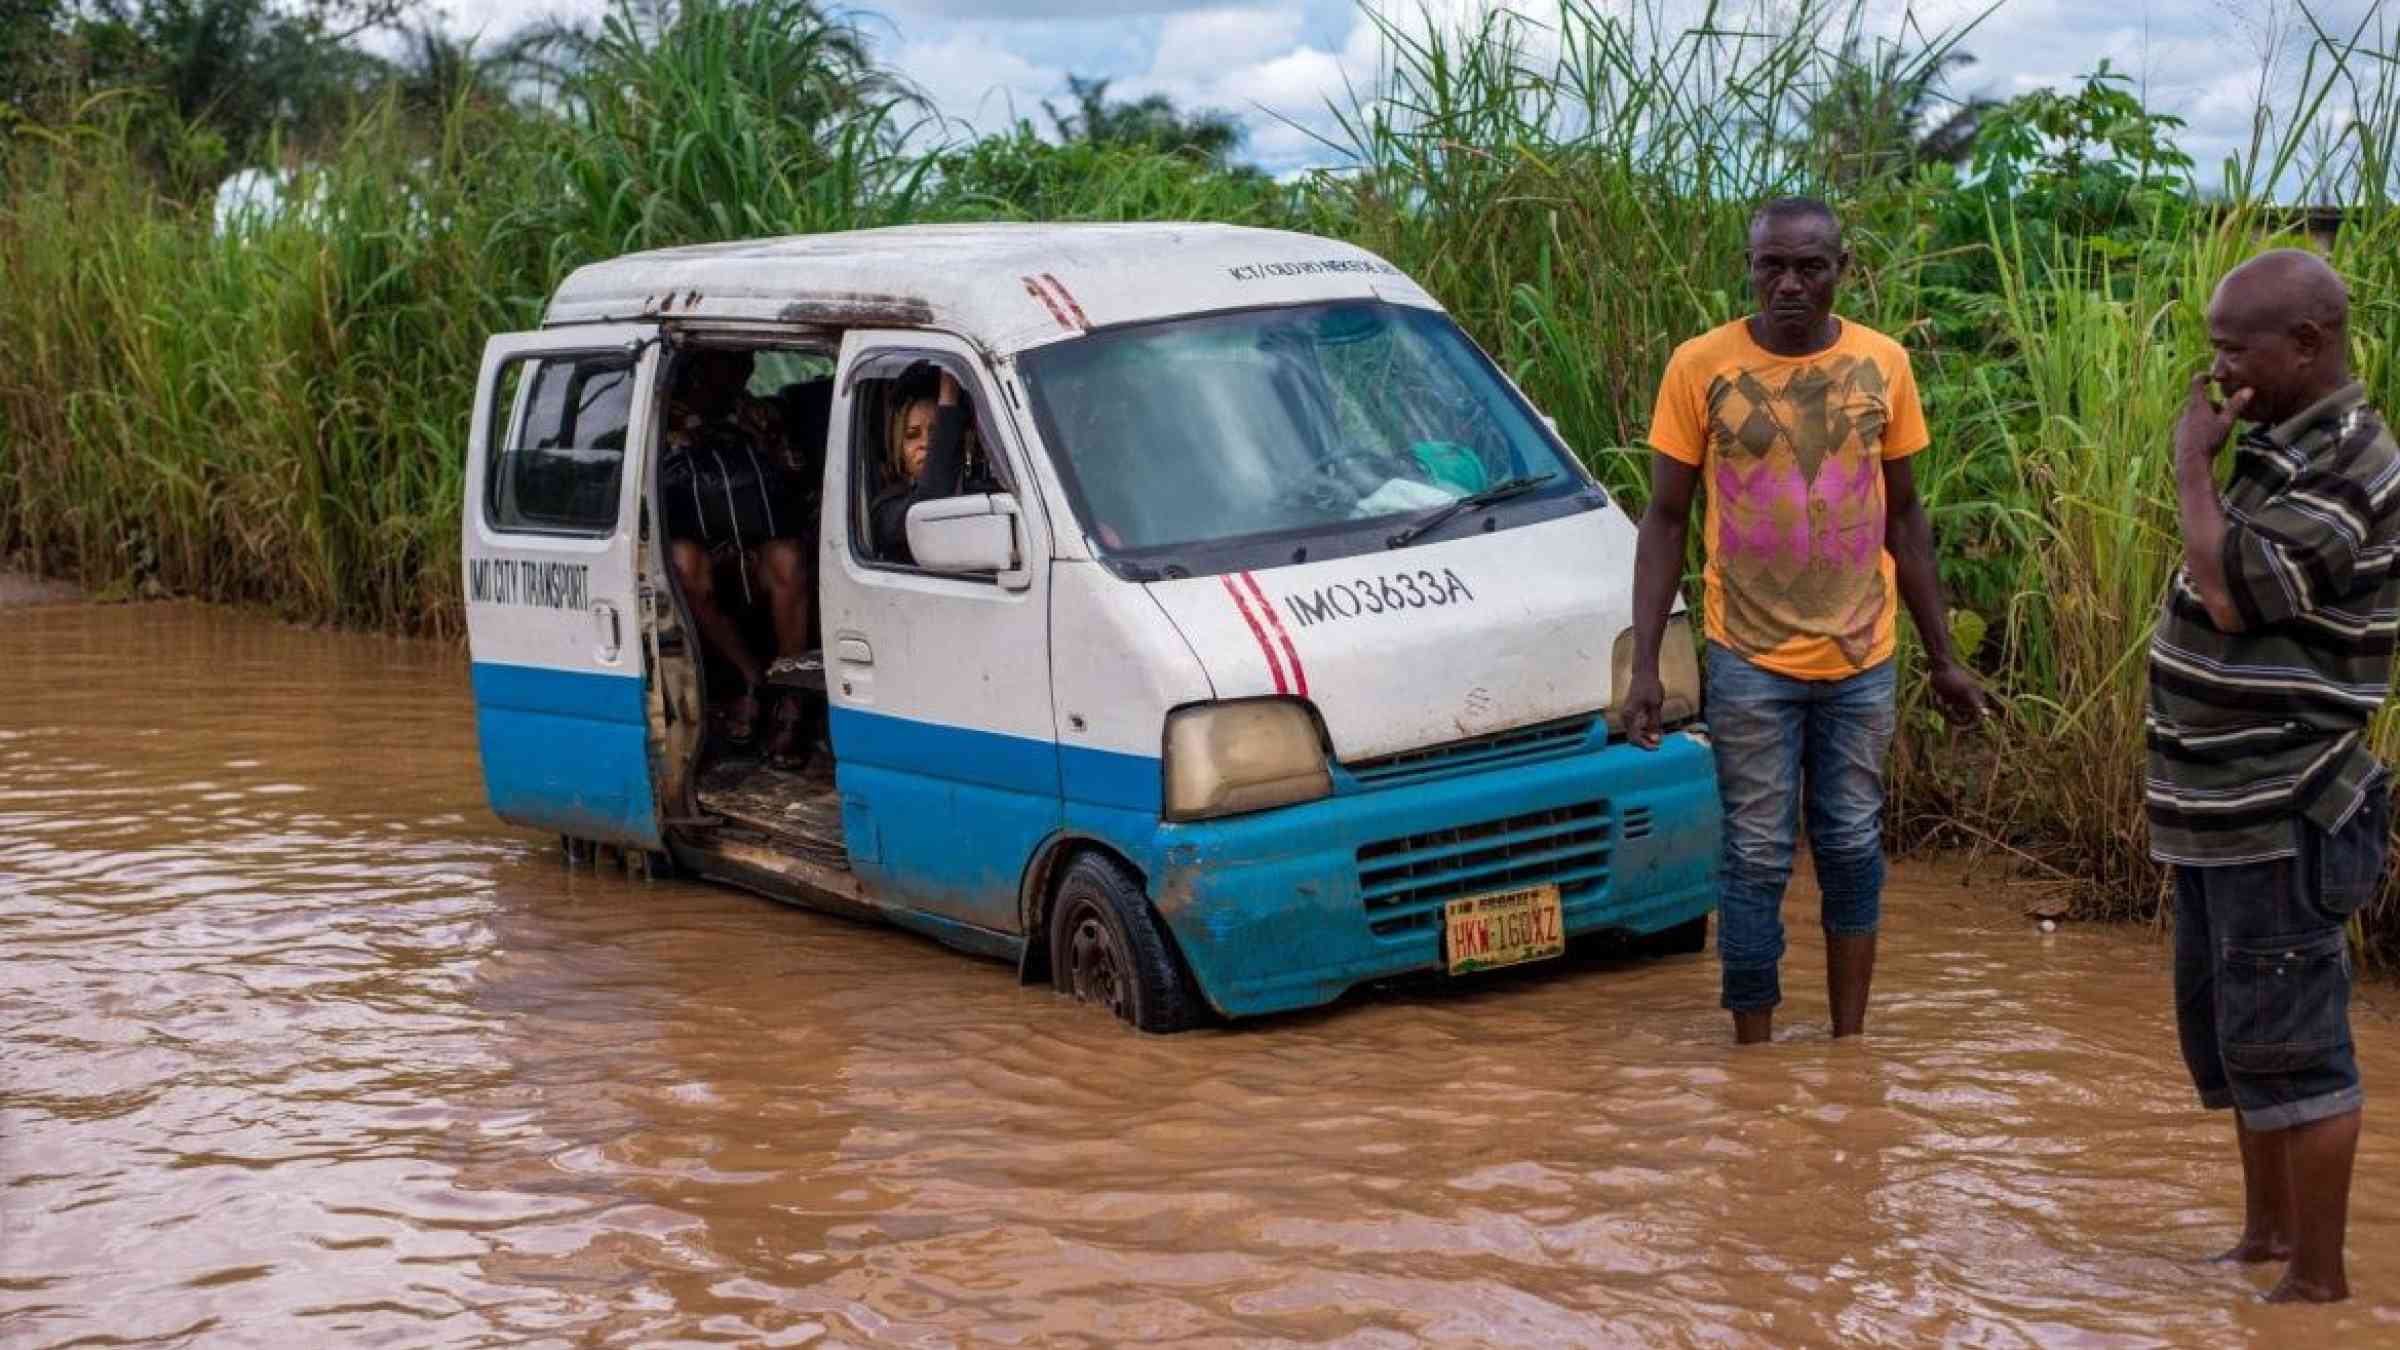 Nigeria expert insights into why floods devastate and what to do